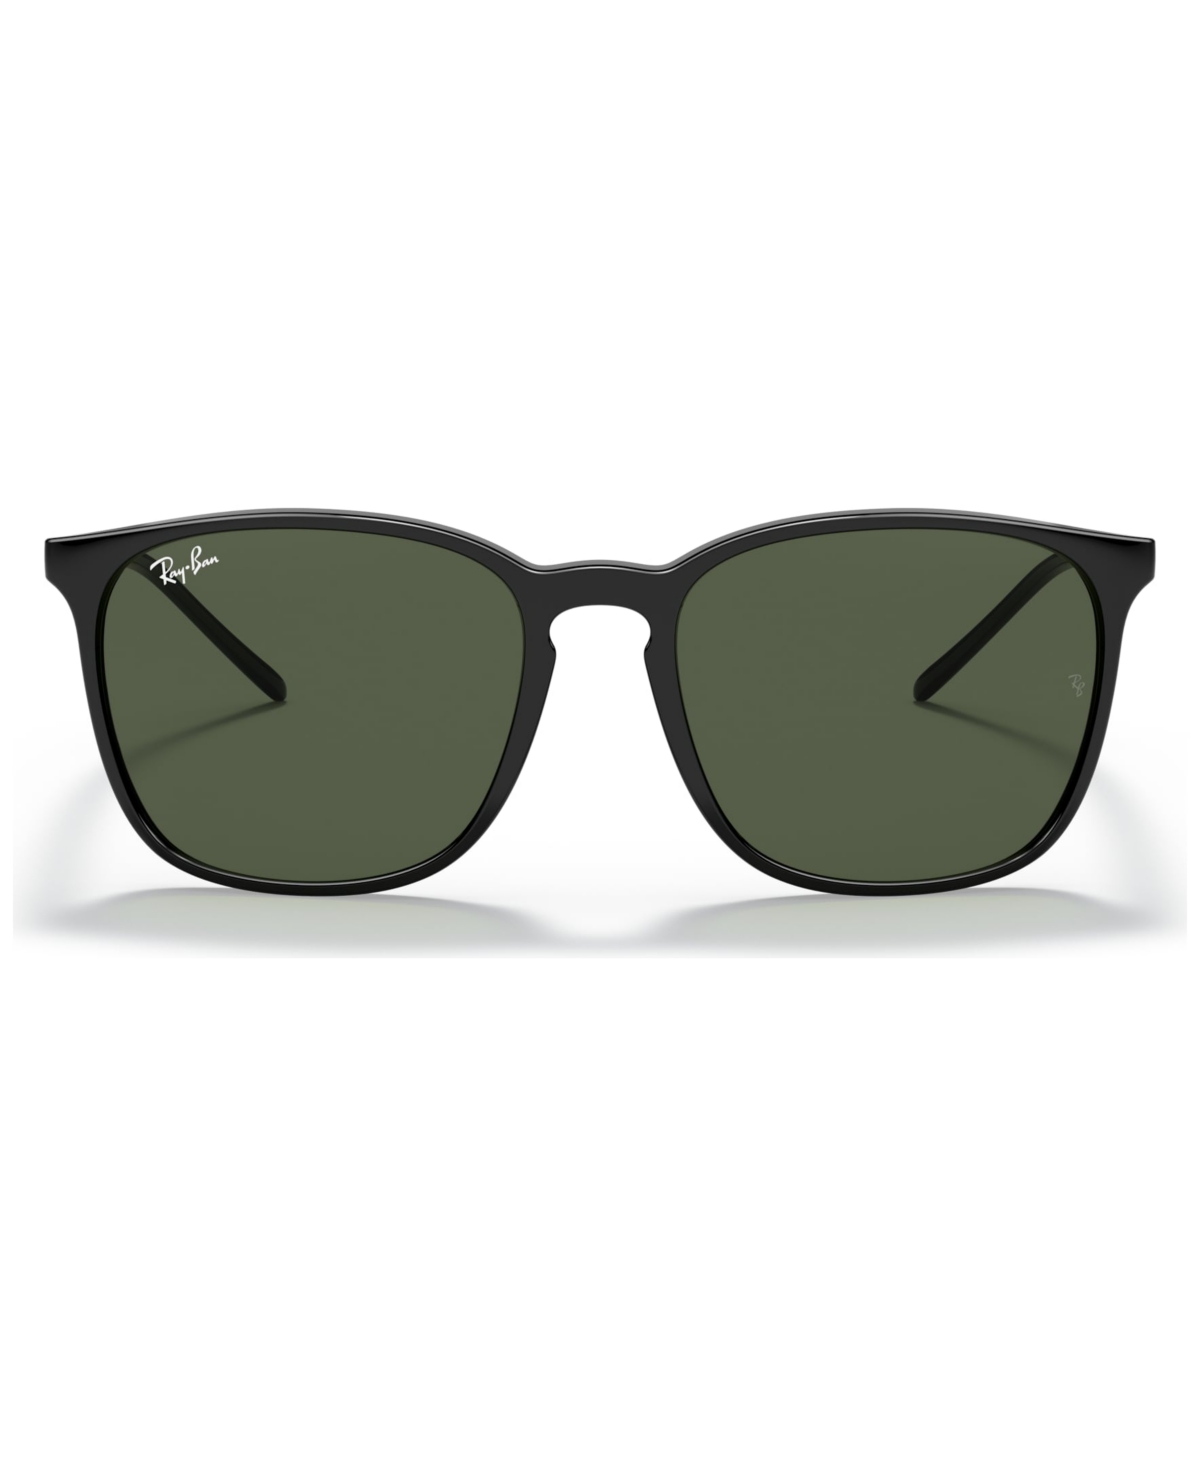 Ray Ban Unisex Sunglasses, Rb4387 In Black,green